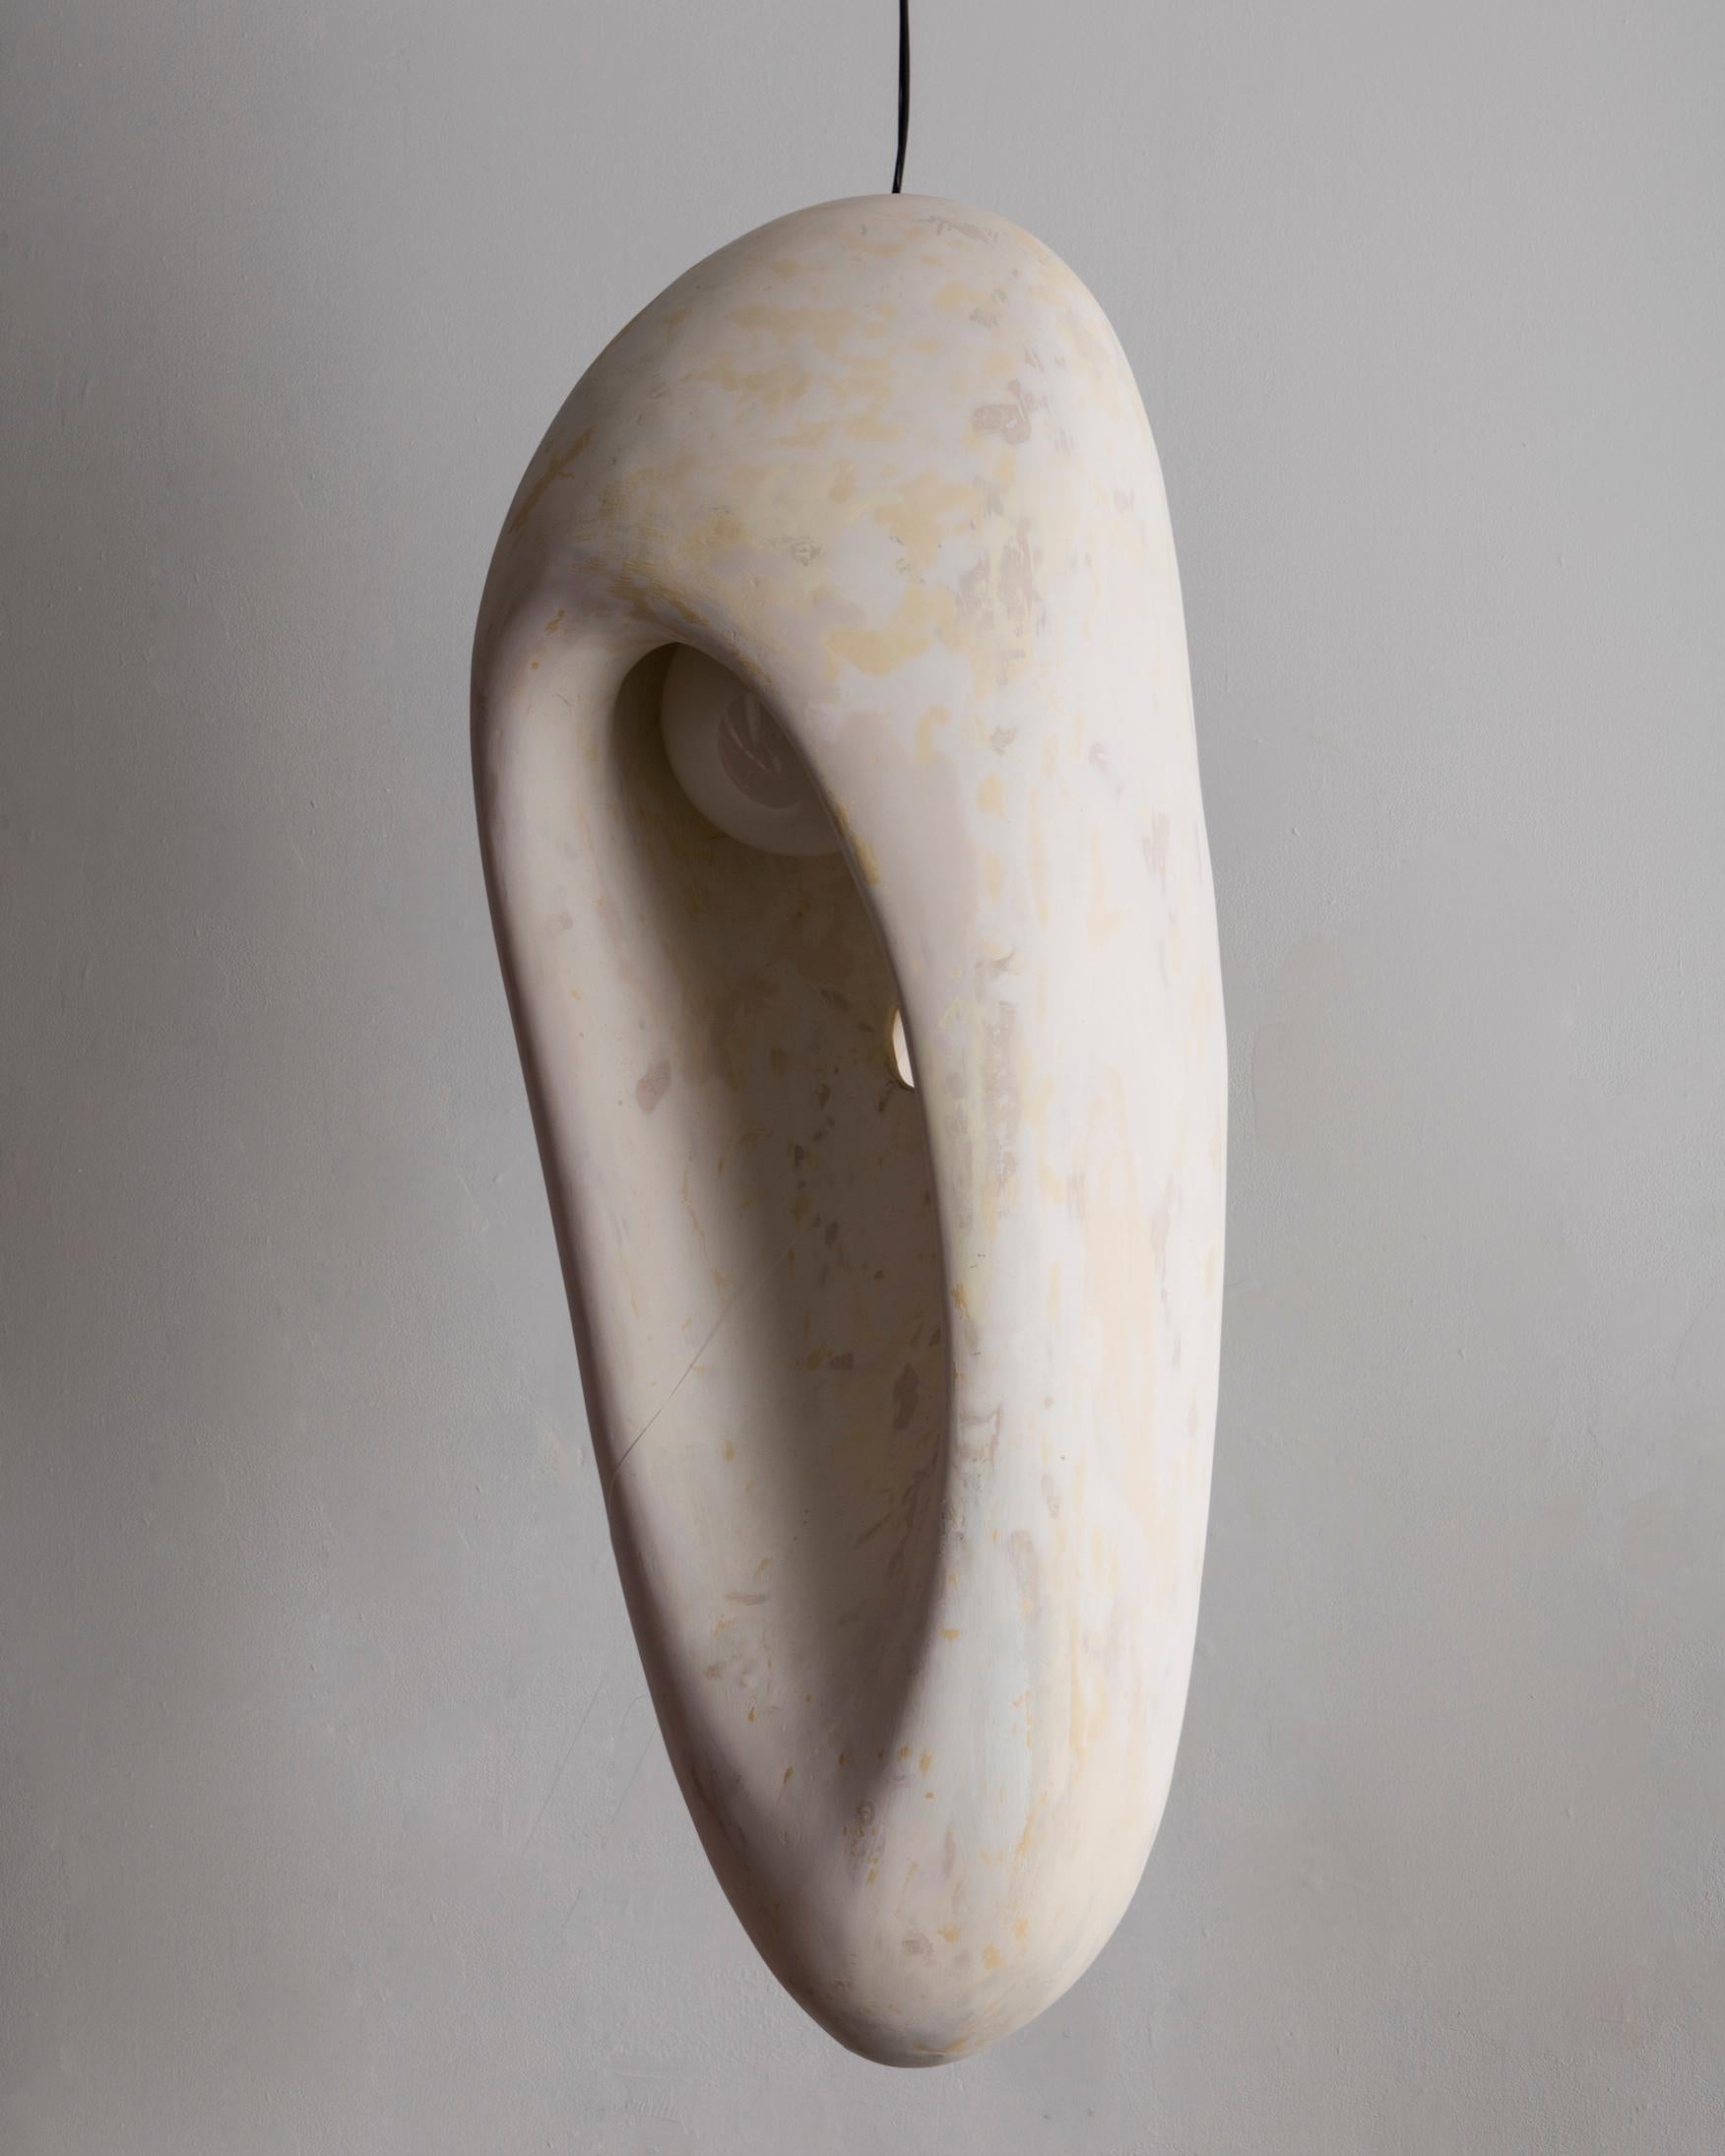 American Sculptural illuminated form in surfboard foam by Rogan Gregory